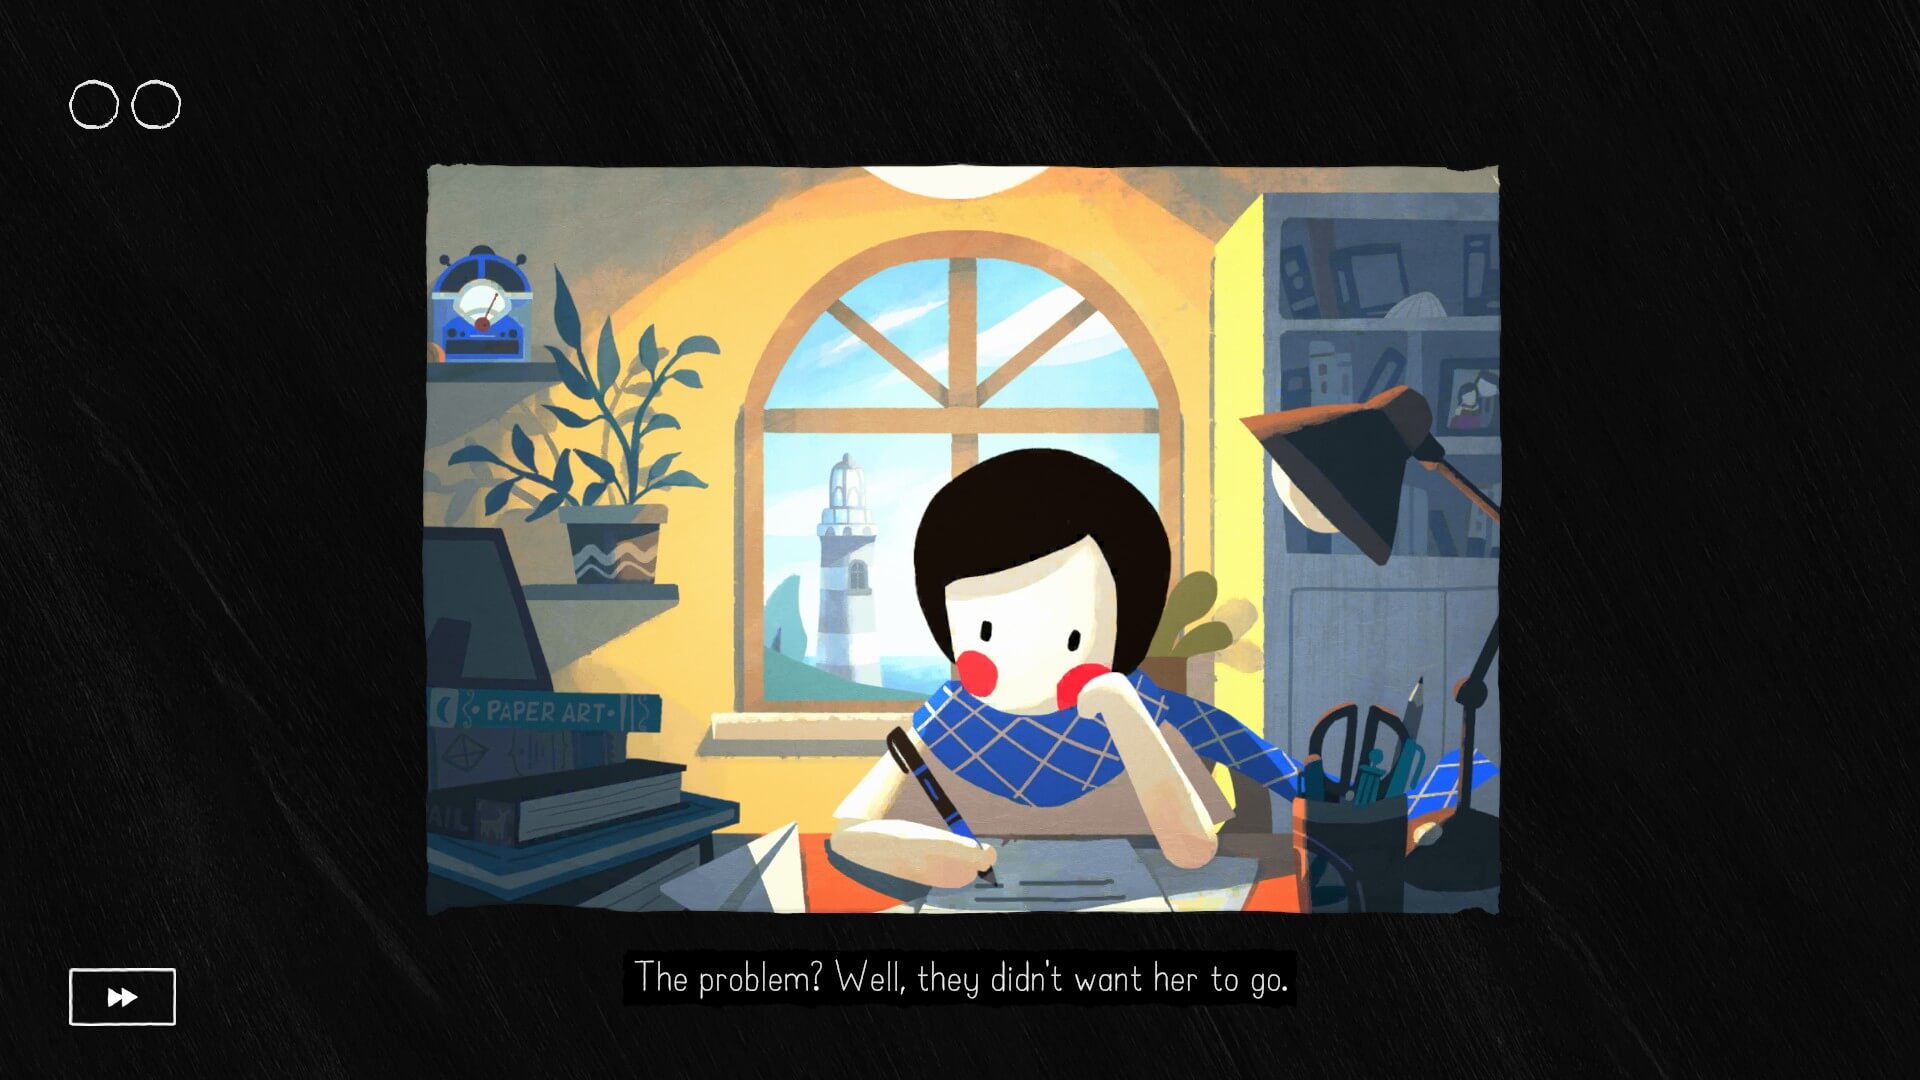 The main character, Paige, sits at her desk with a pen in her hand. There are subtitles below saying 'The problem? Well they didn't want her to go'. Behind her is a window with a tower in the distance showing highlighting where her journey will take her.